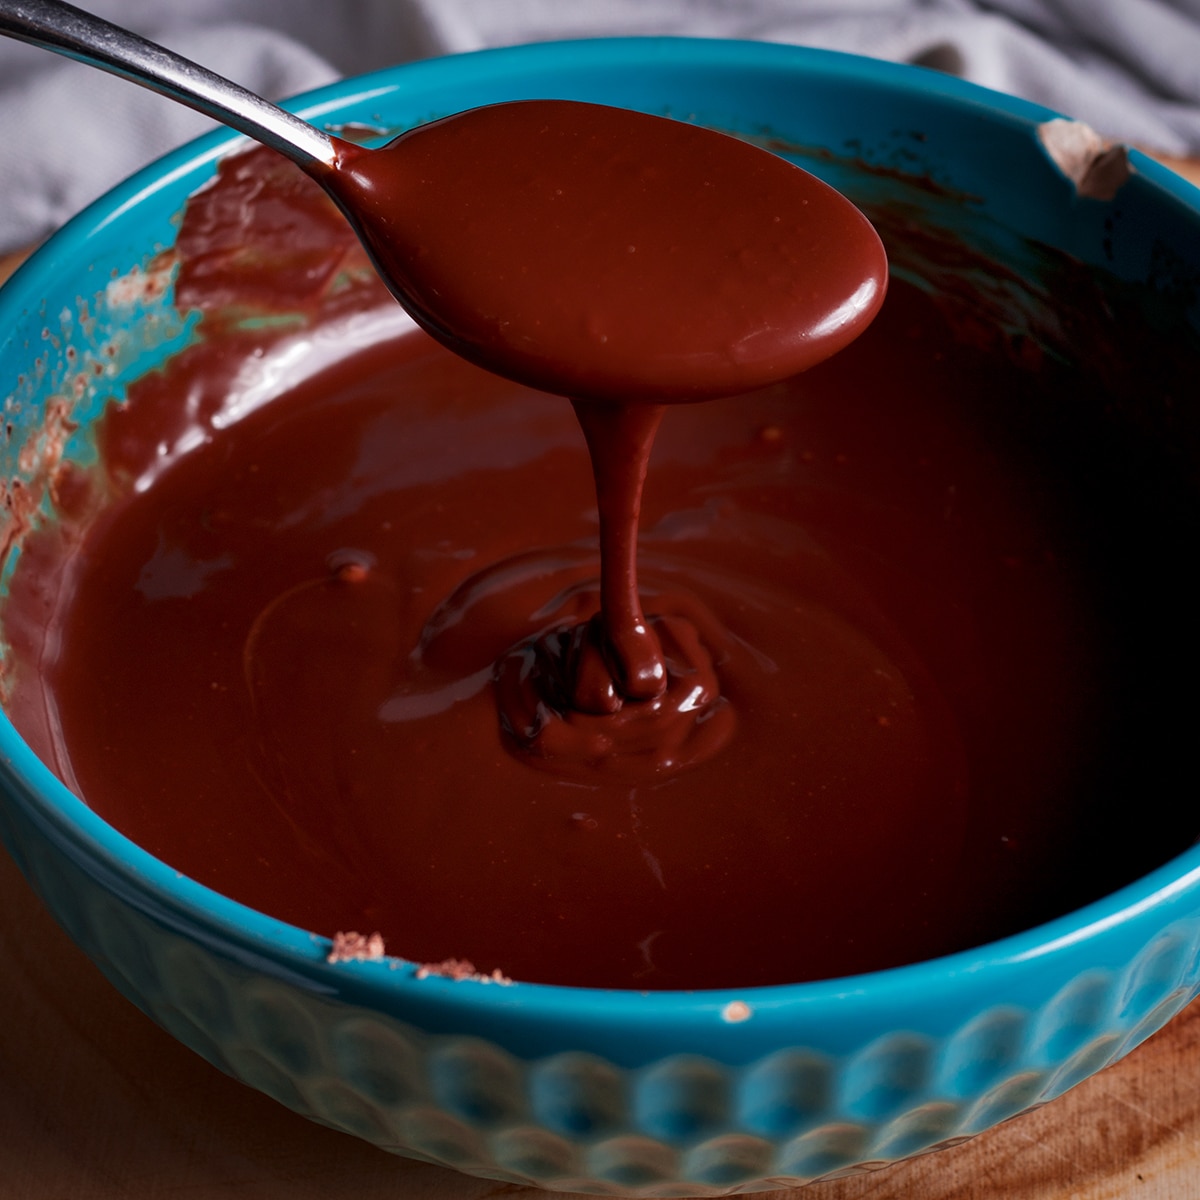 Someone lifting a spoon from a bowl of chocolate ganache so you can see how smooth it is.